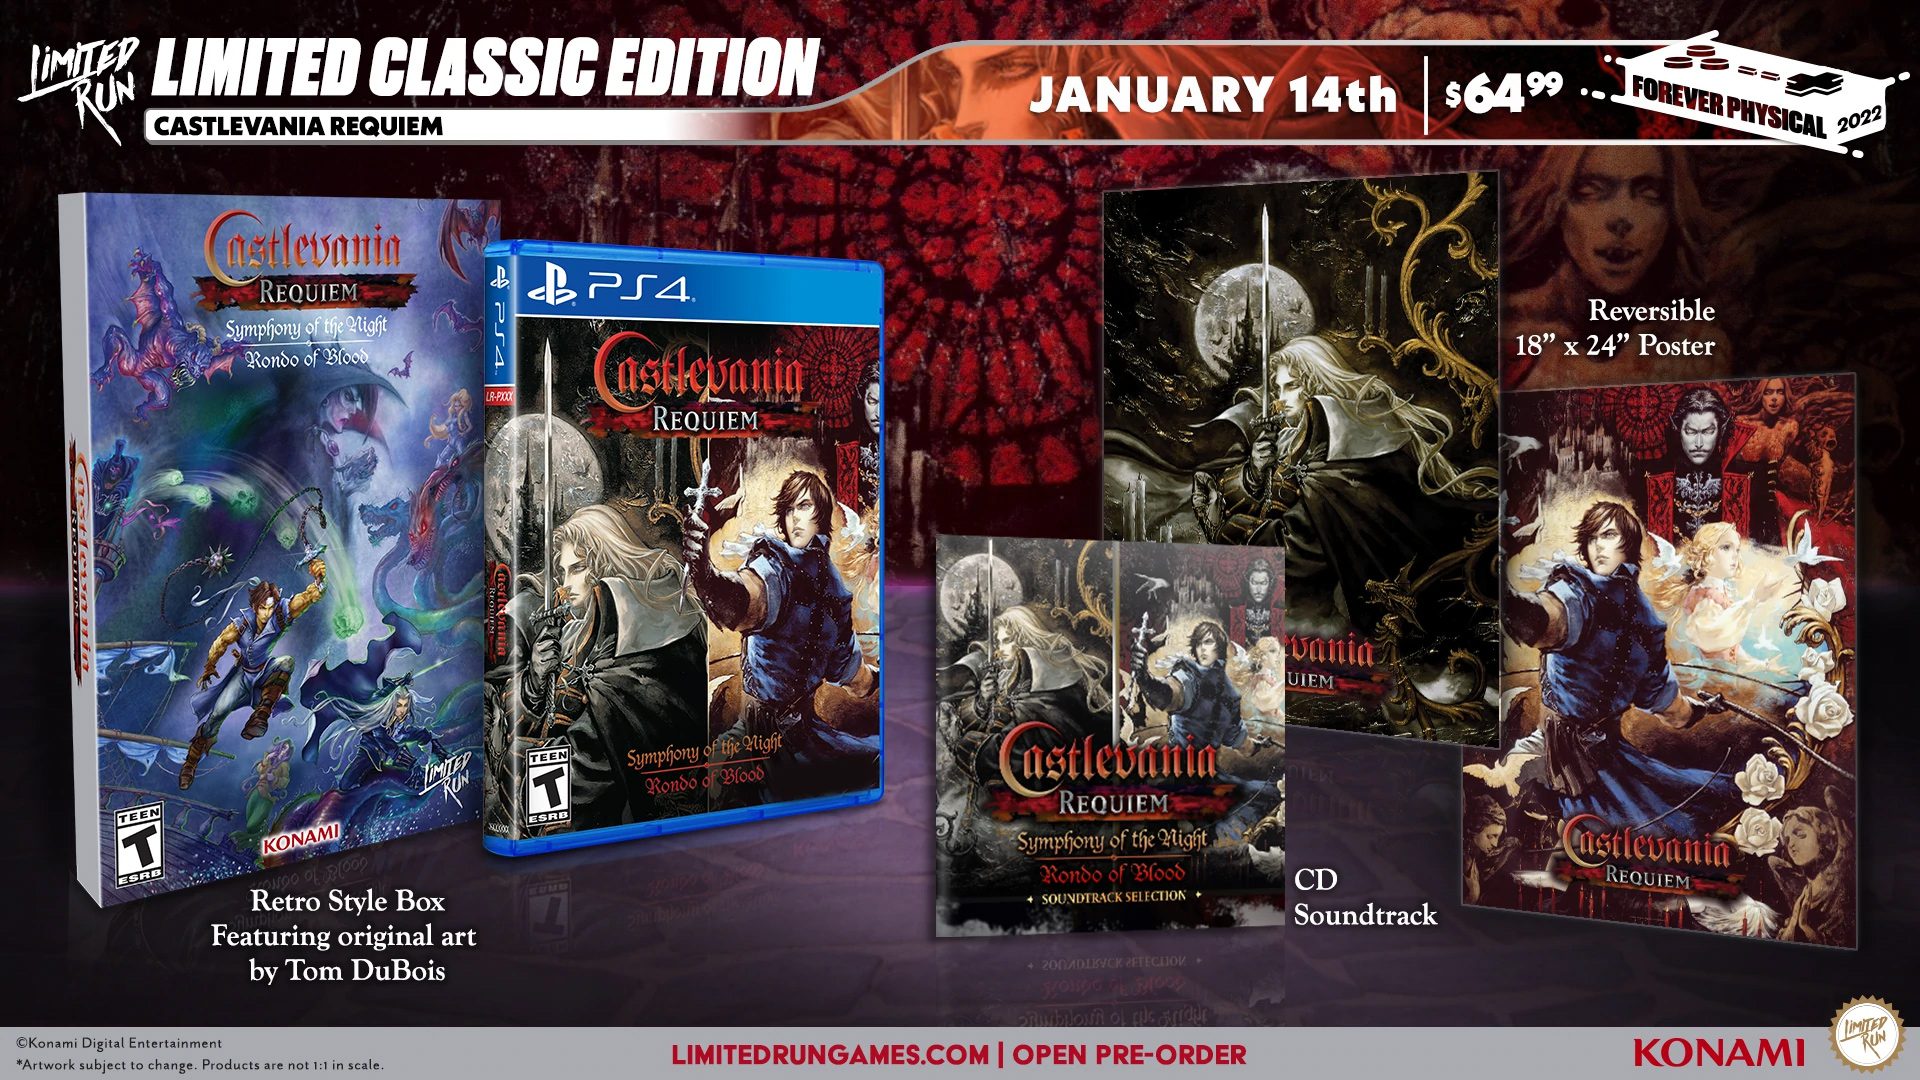 Castlevania Requiem physical edition pre-orders are open at Limited Run, and check out that box! thumbnail